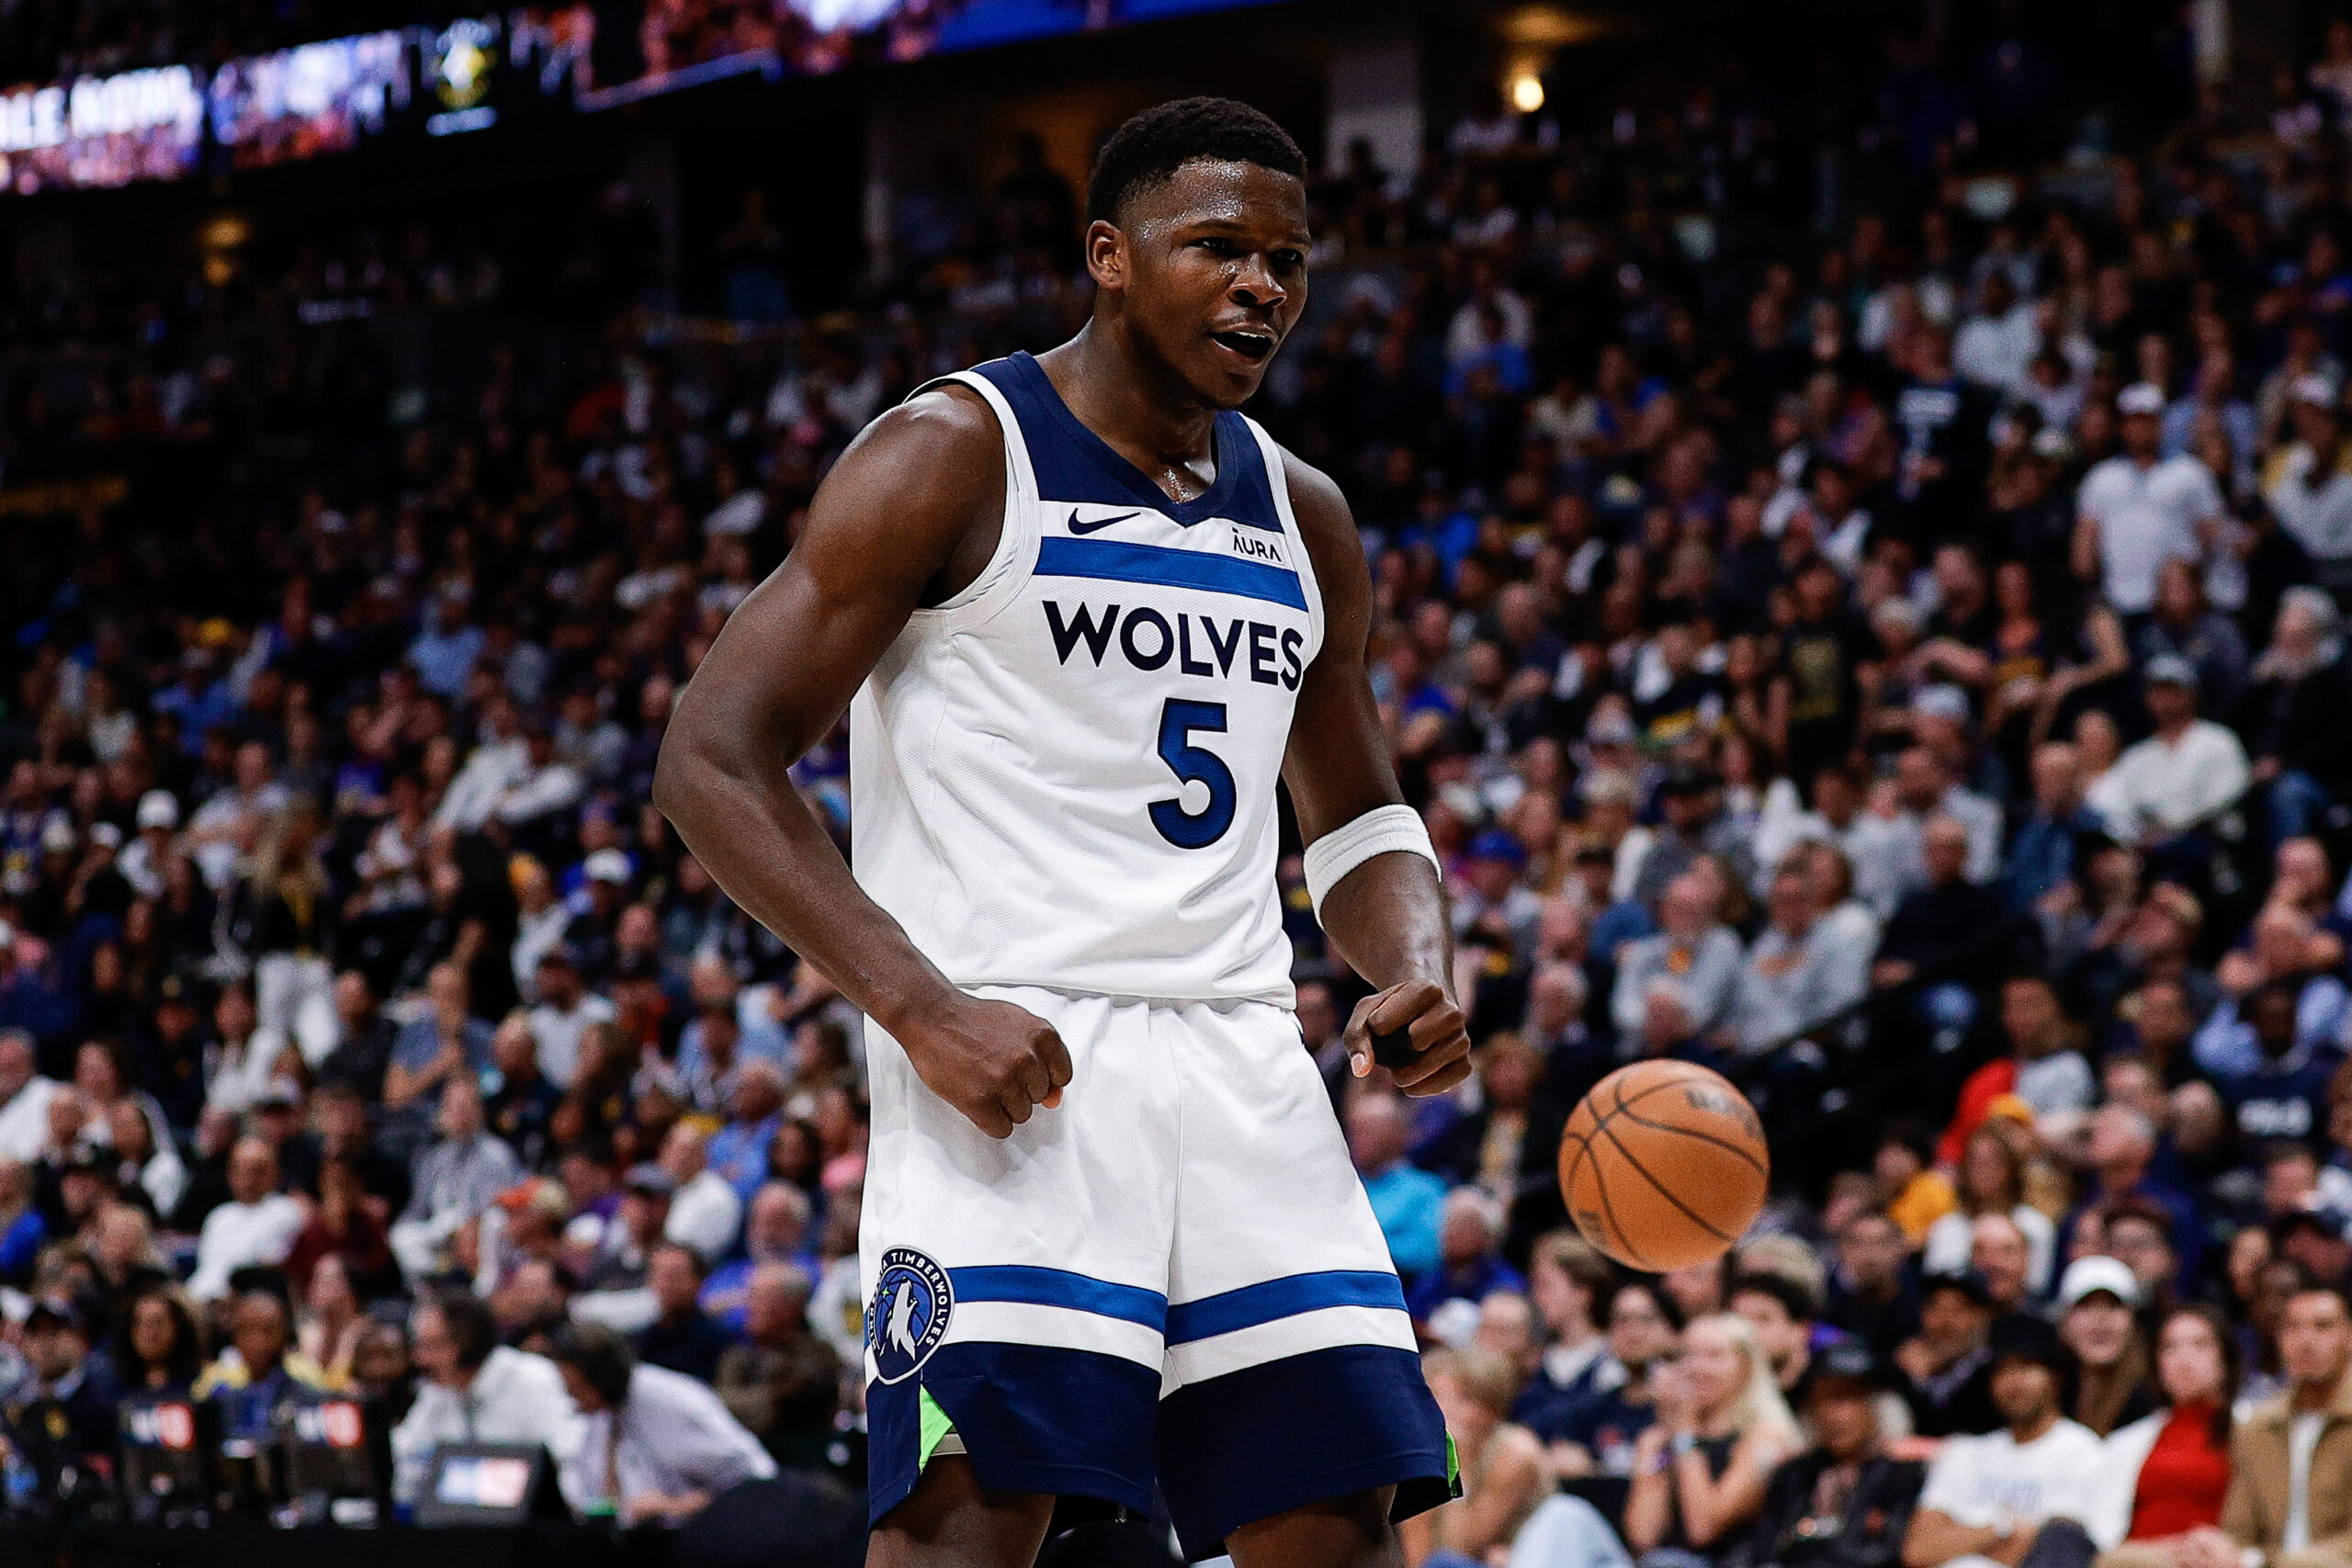 Minnesota Timberwolves game today: Timberwolves Game 7 TV info, Timberwolves vs Nuggets schedule